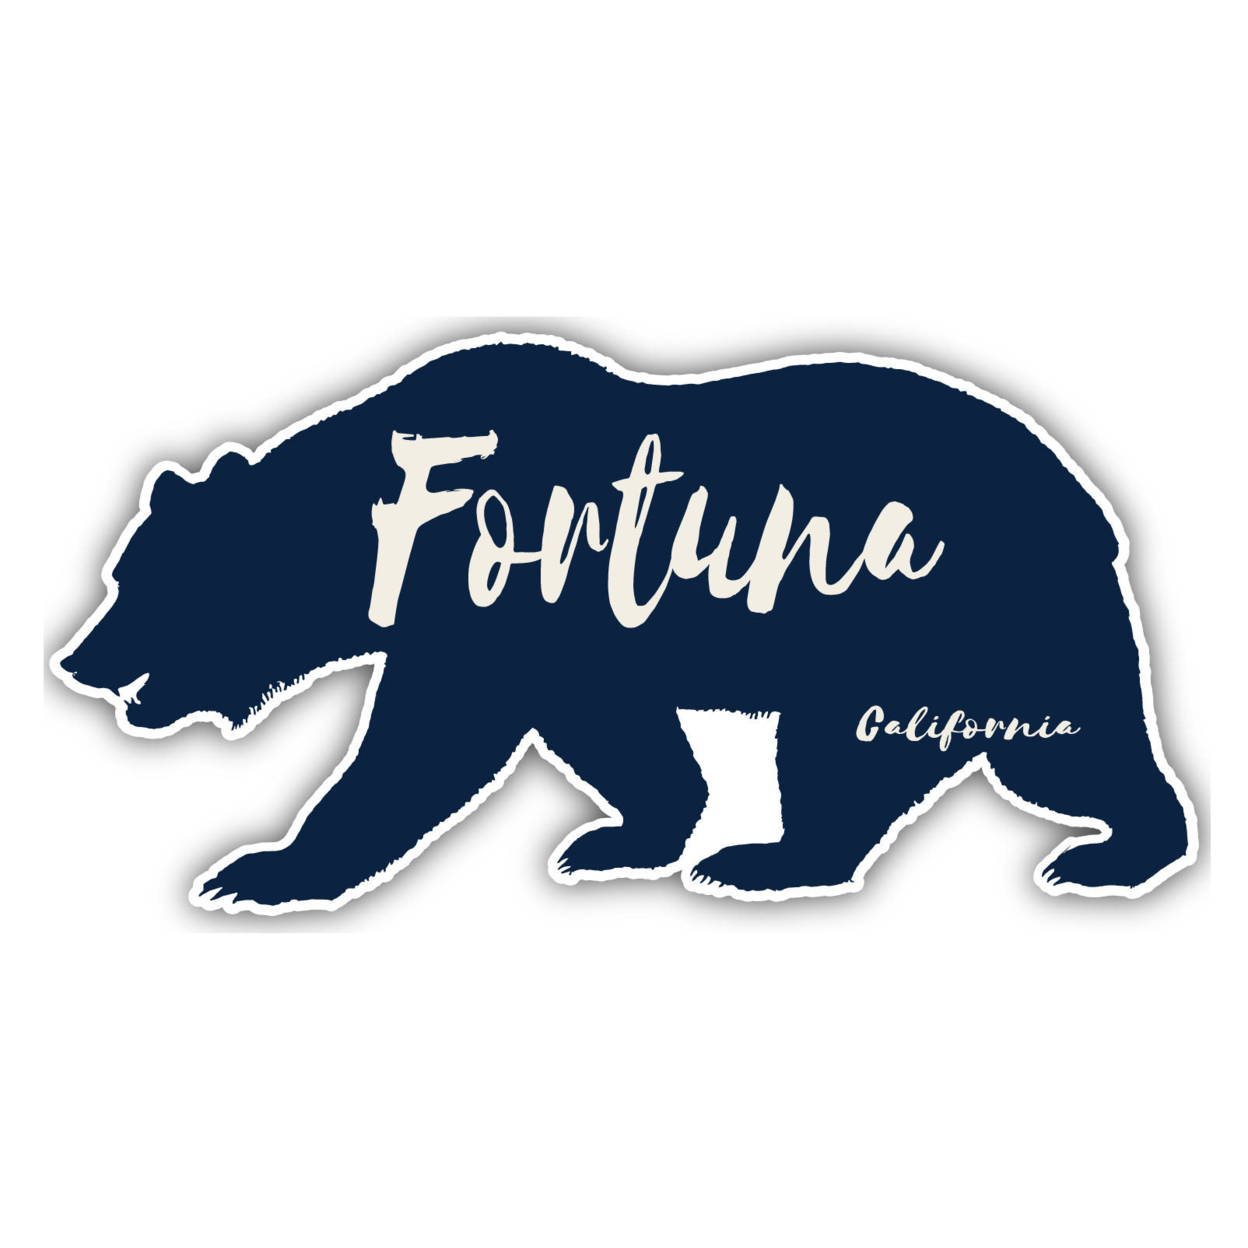 Fortuna California Souvenir Decorative Stickers (Choose Theme And Size) - 4-Pack, 12-Inch, Bear